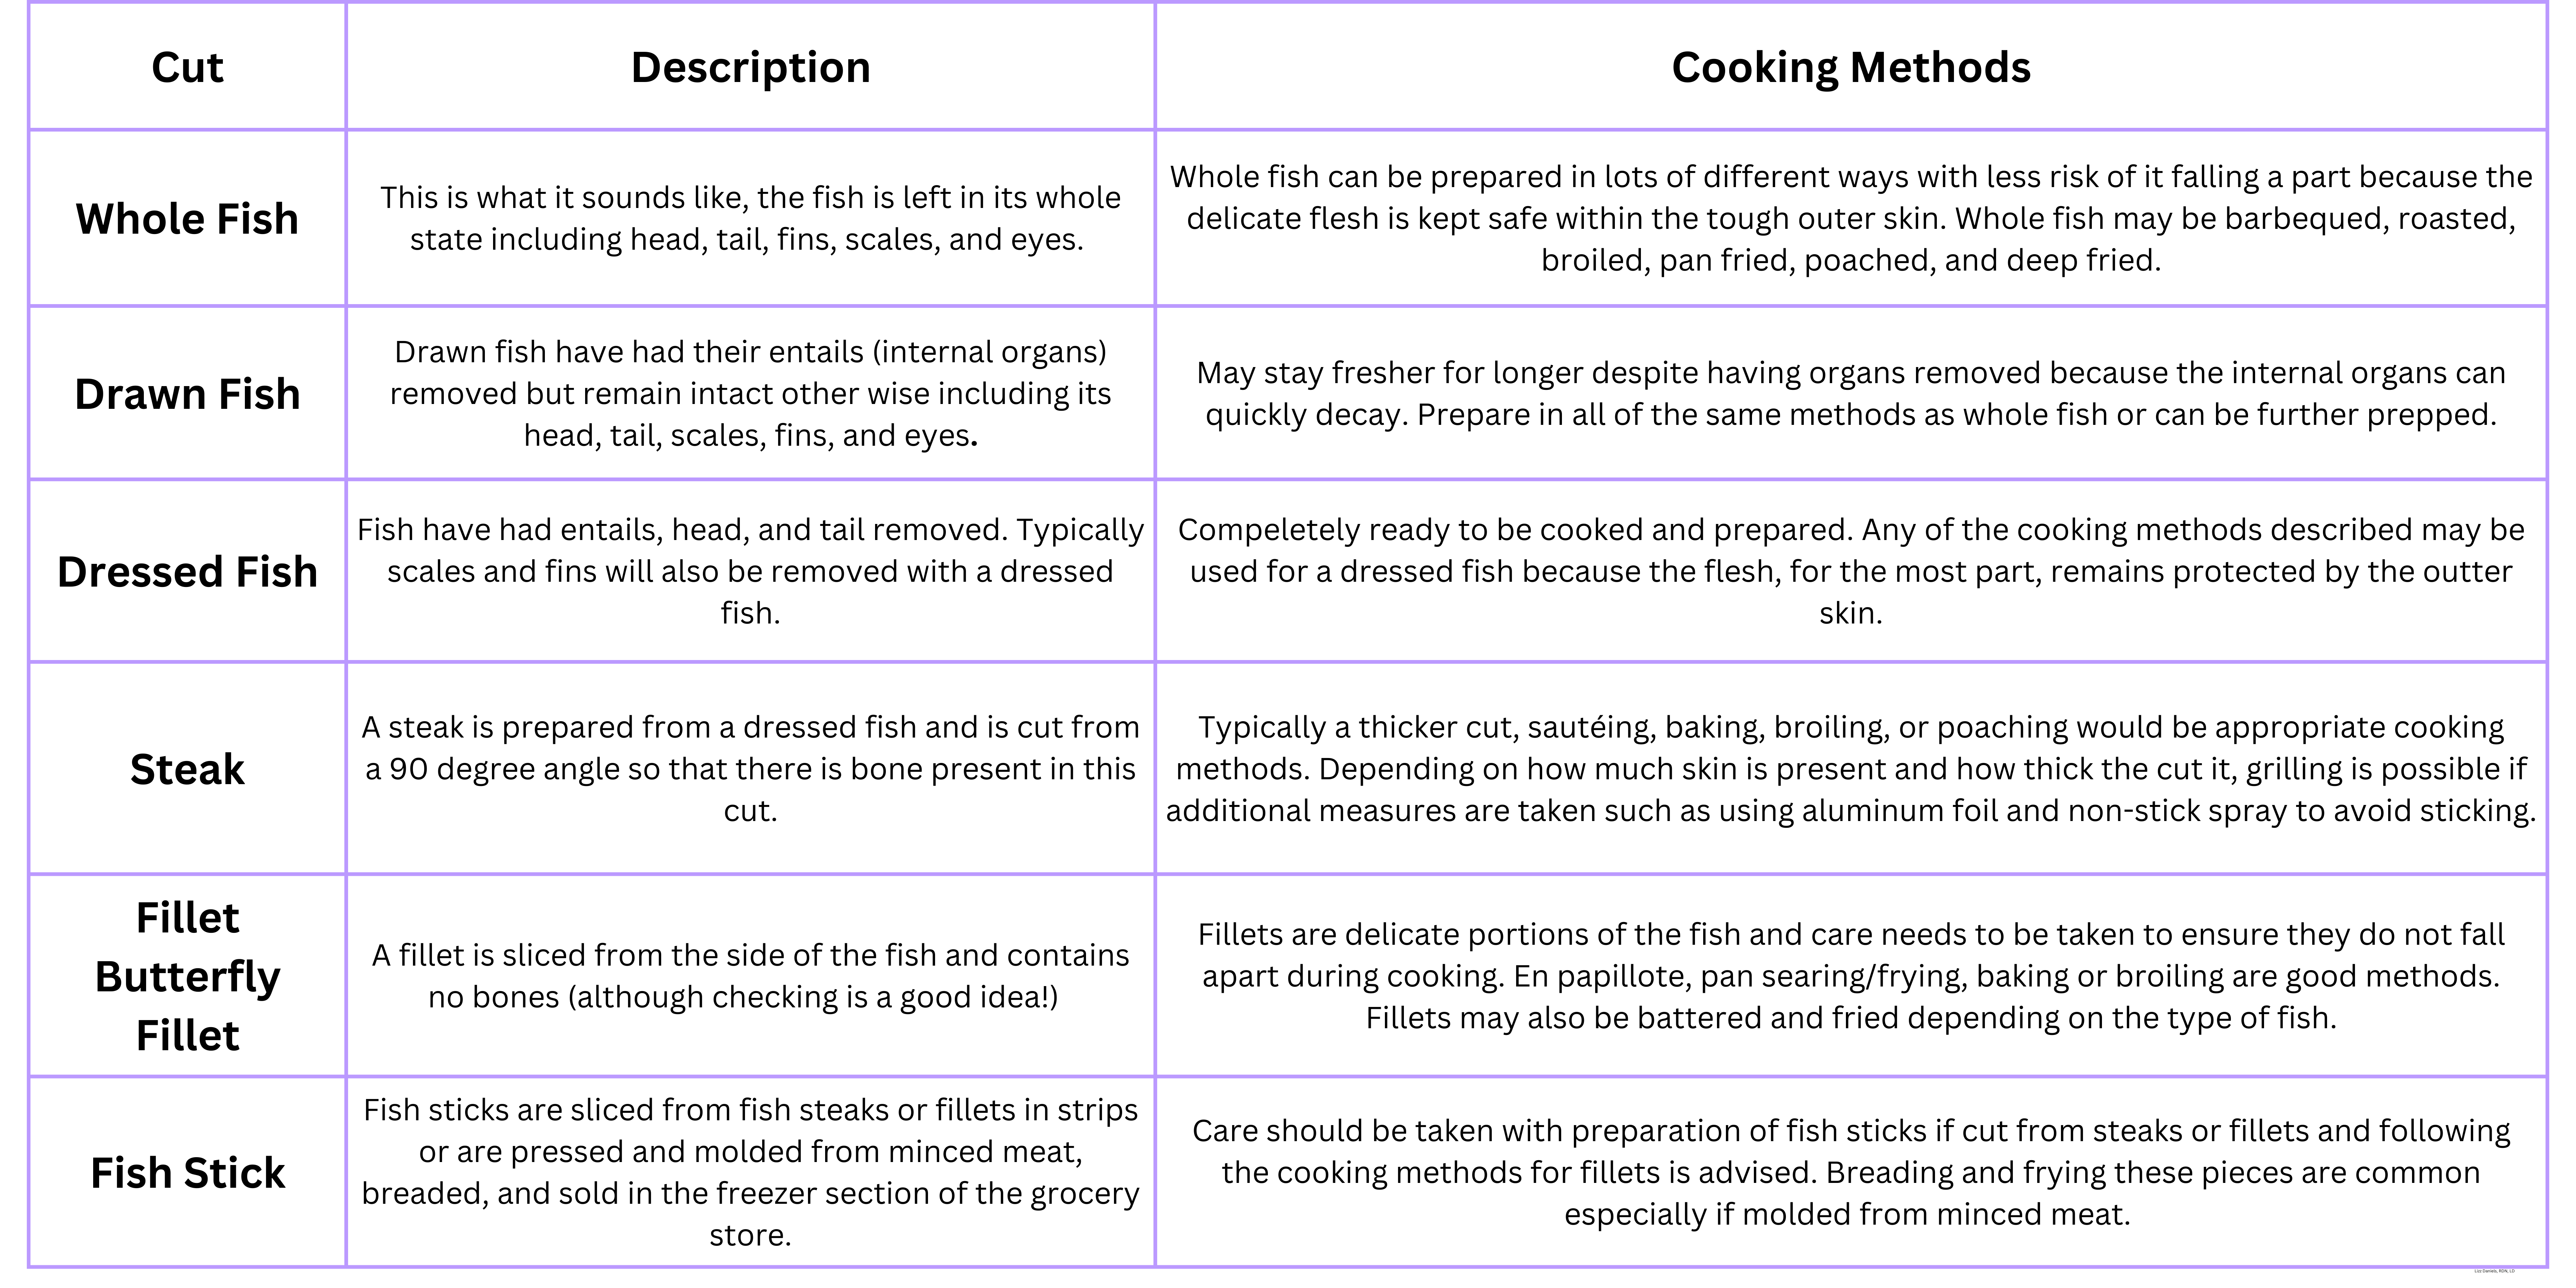 Common Fish Cuts and Cooking Methods (2).png